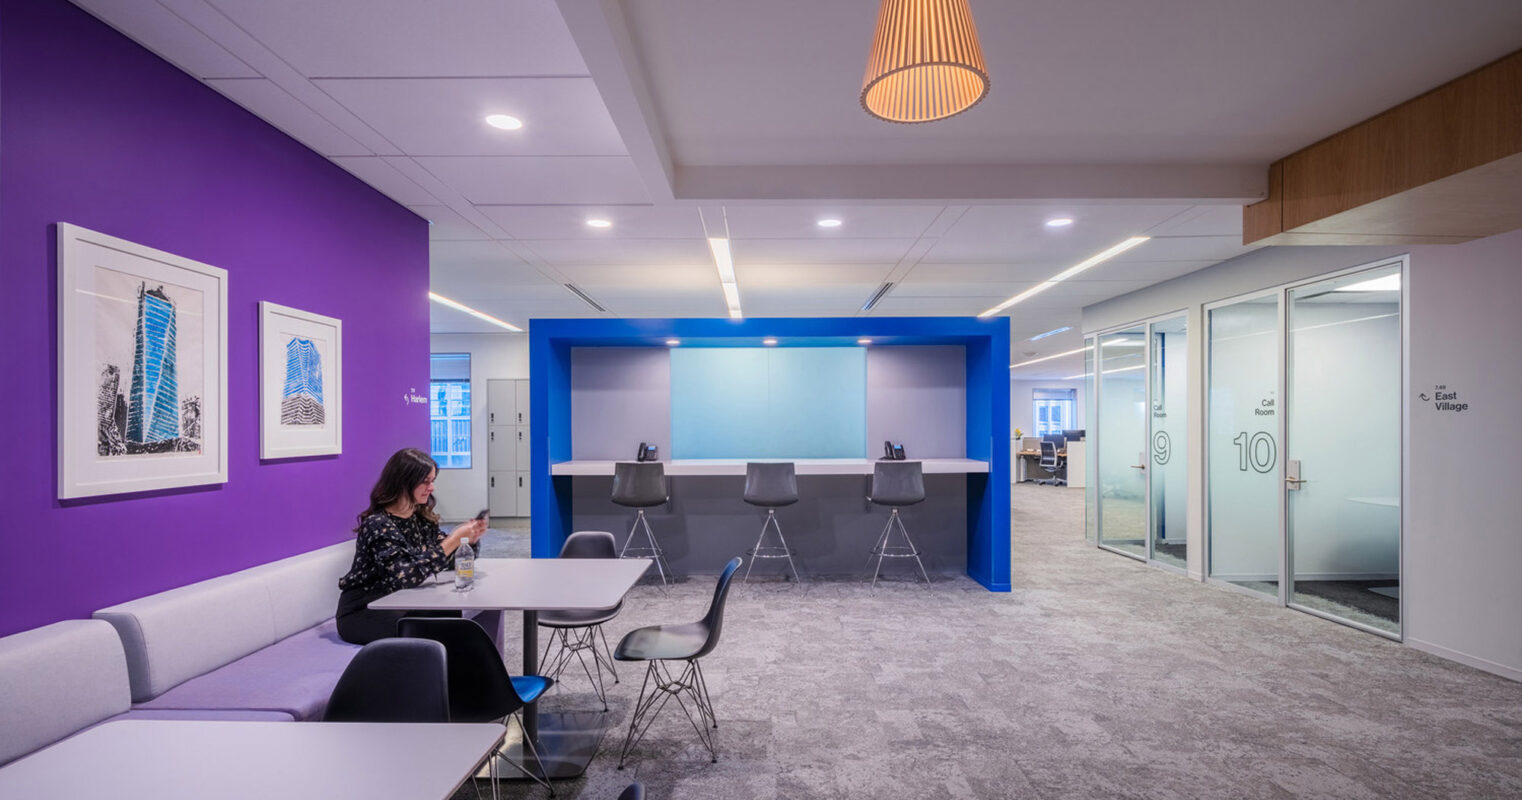 A modern office space featuring a vibrant purple accent wall, sleek furnishings, pendant lighting, framed skyscraper artwork, and a woman working at a white bench-style table. Glass doors and wooden panels enhance the open, collaborative layout.